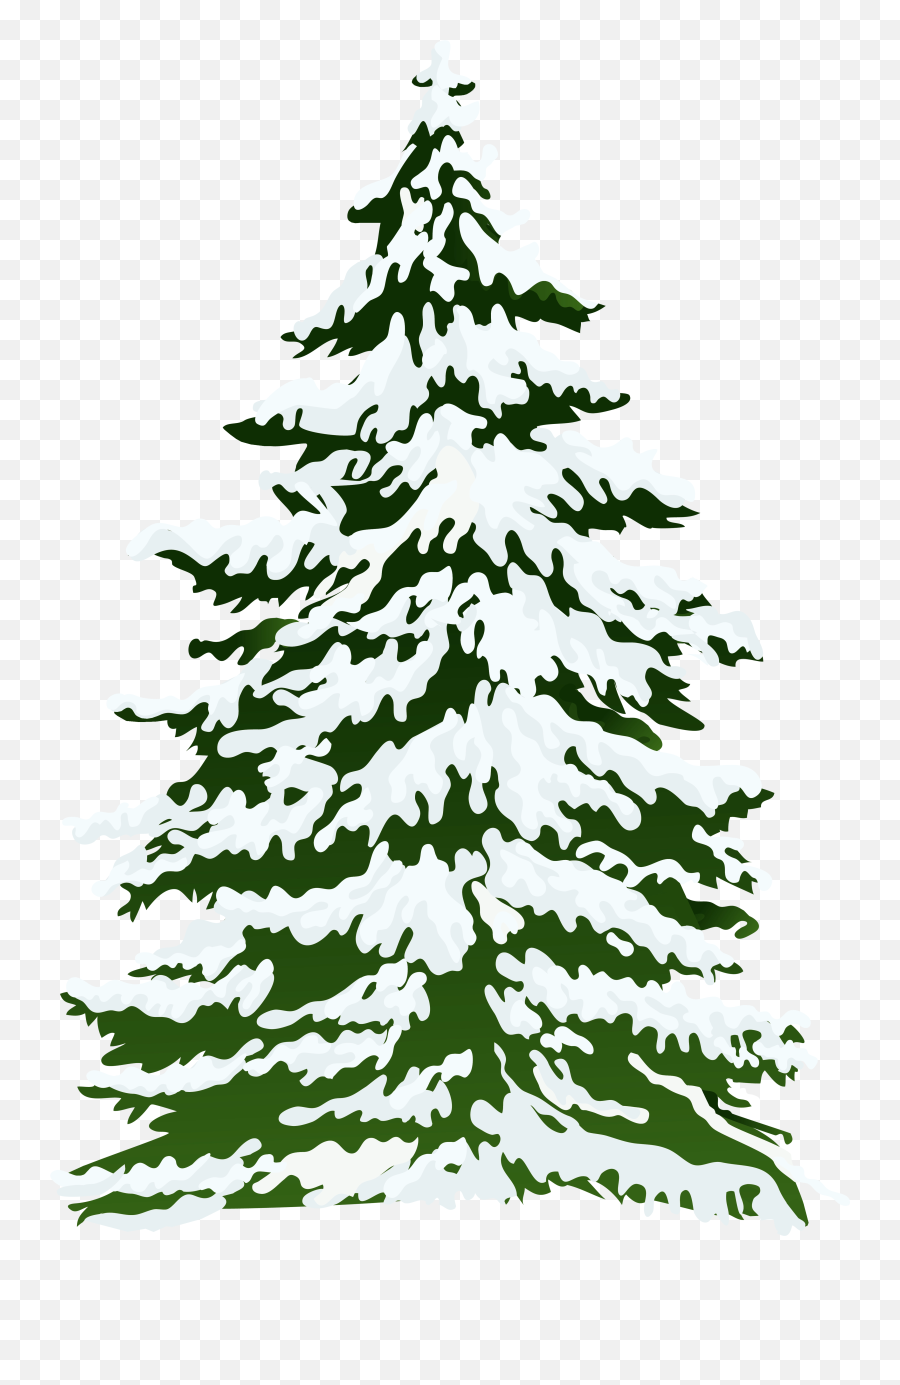 Download Free Png Pine Tree Freeuse Stock Outline - Rr Snowy Pine Tree Watercolor,Pine Tree Png